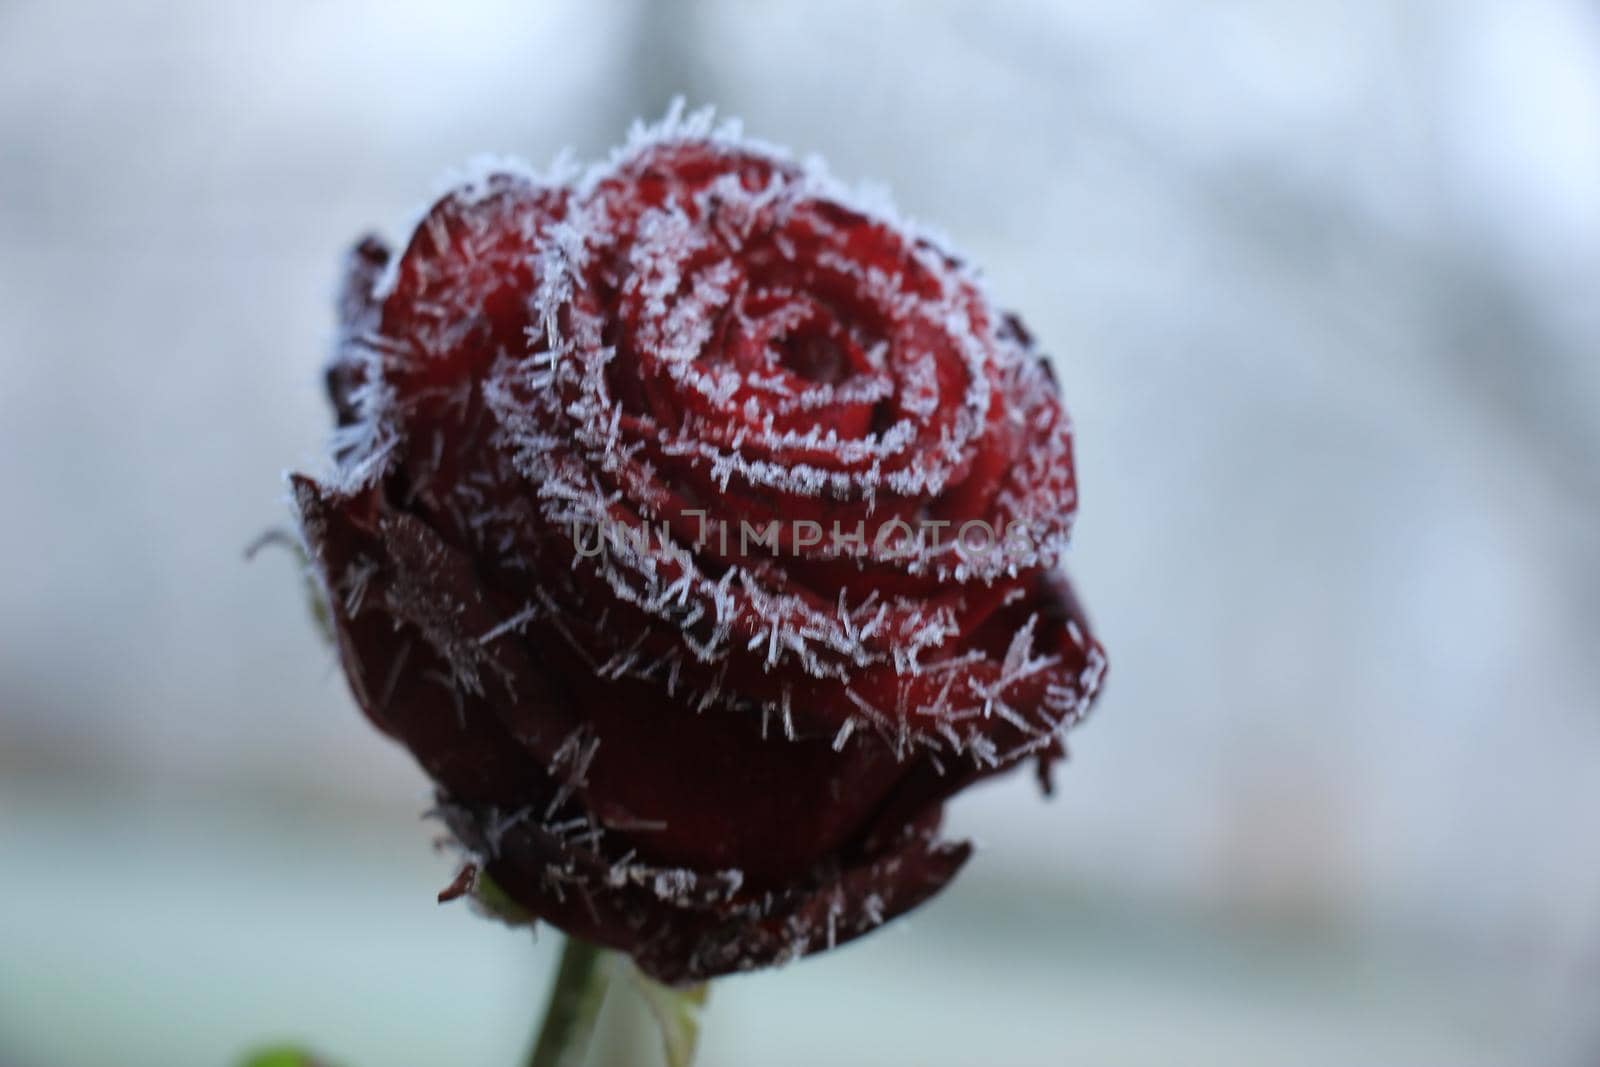 White hoar frost on a single red rose by studioportosabbia